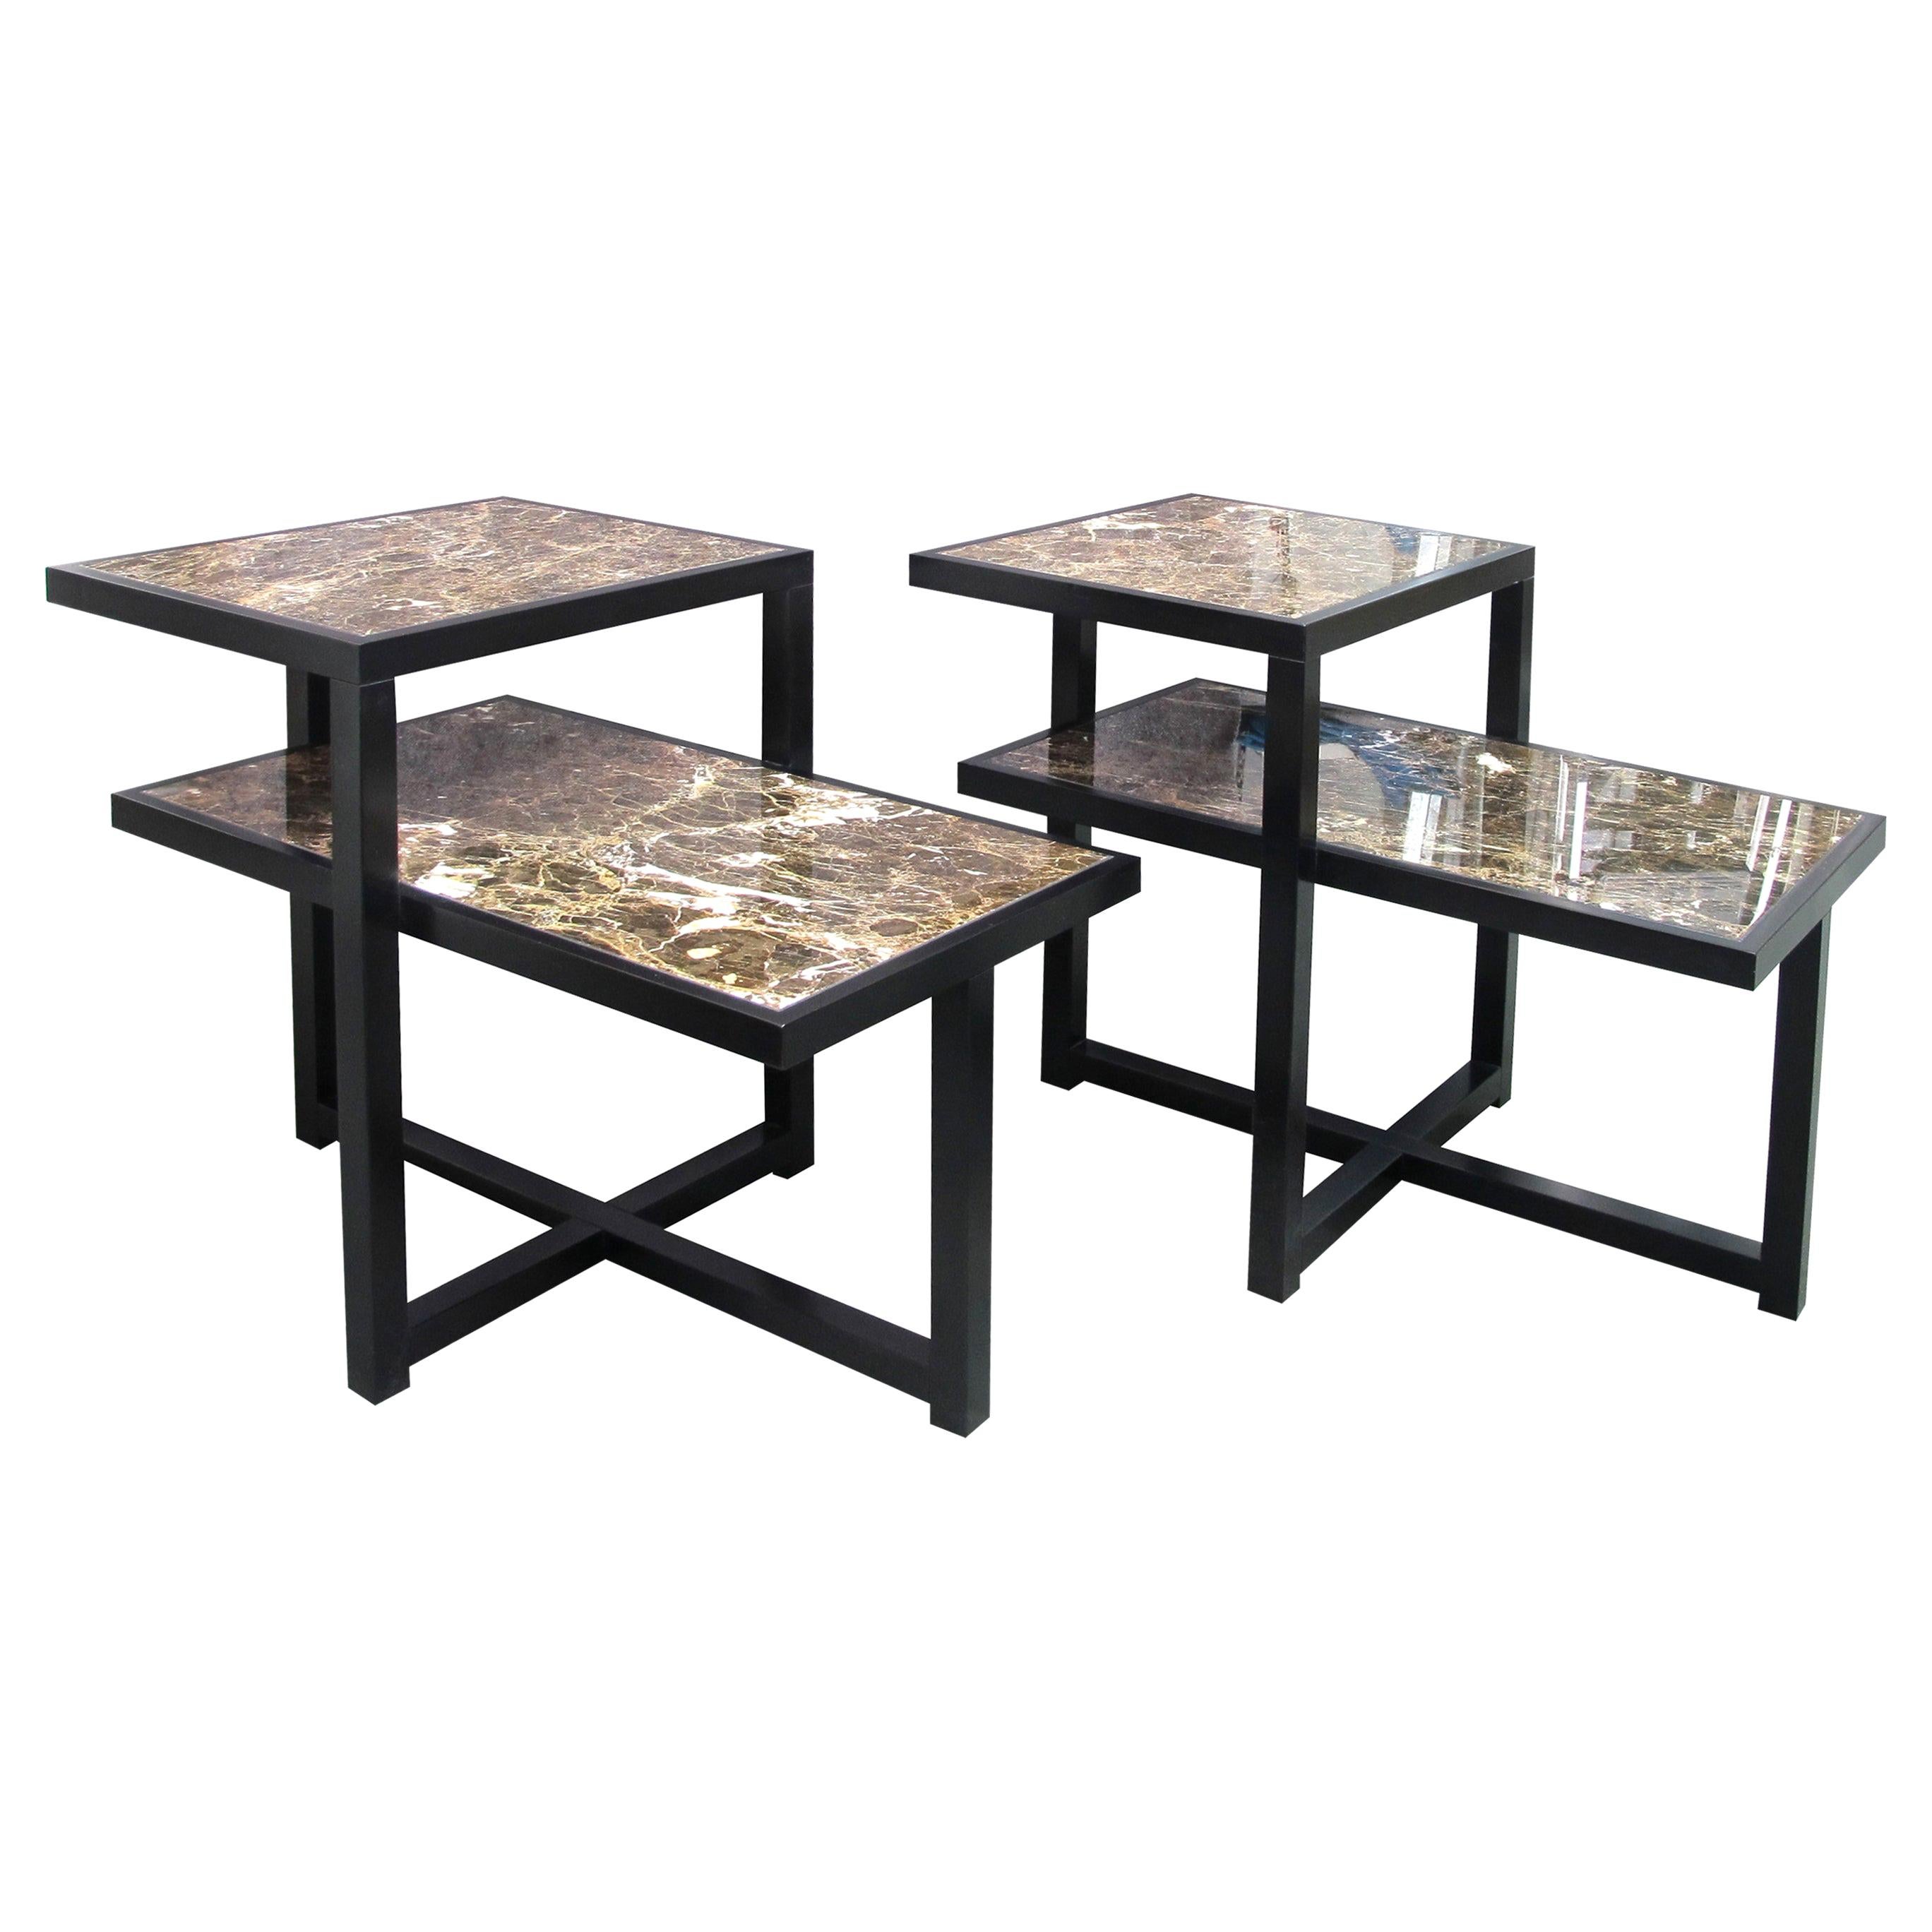 Pair of 1960s Italian Two-Tiered Side Tables with Marrón Emperador Marble Top